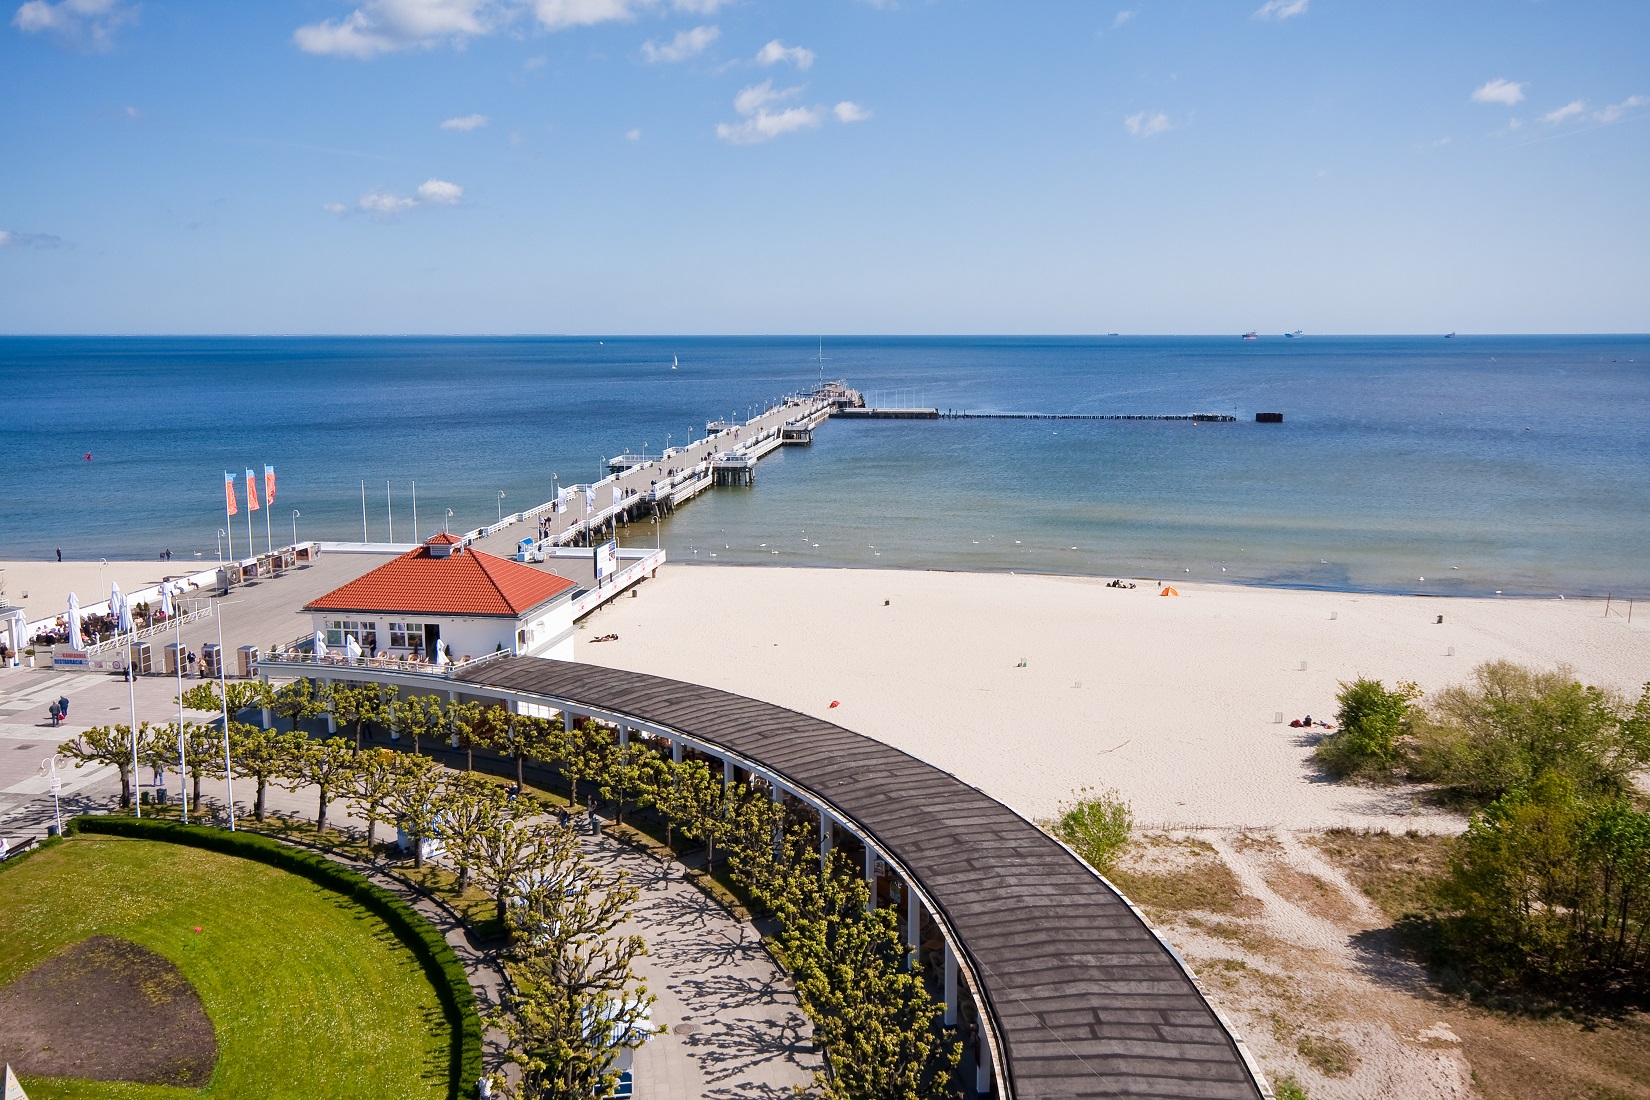 Pier in Sopot is the best way to relax in Tri-city